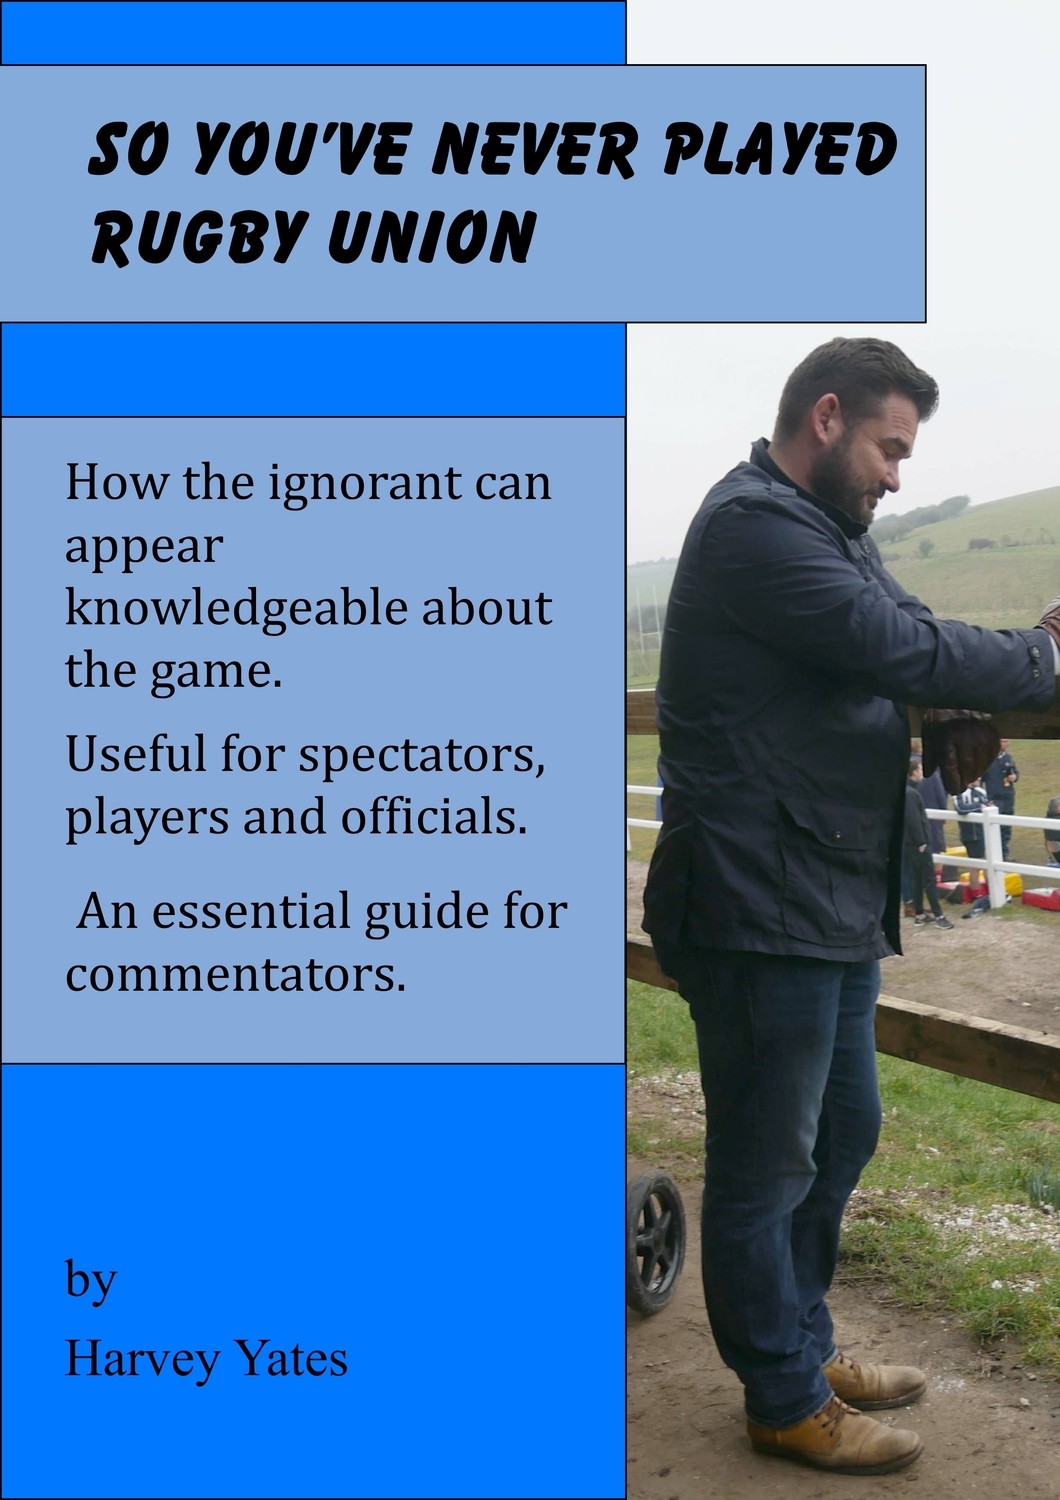 So you've never played rugby union